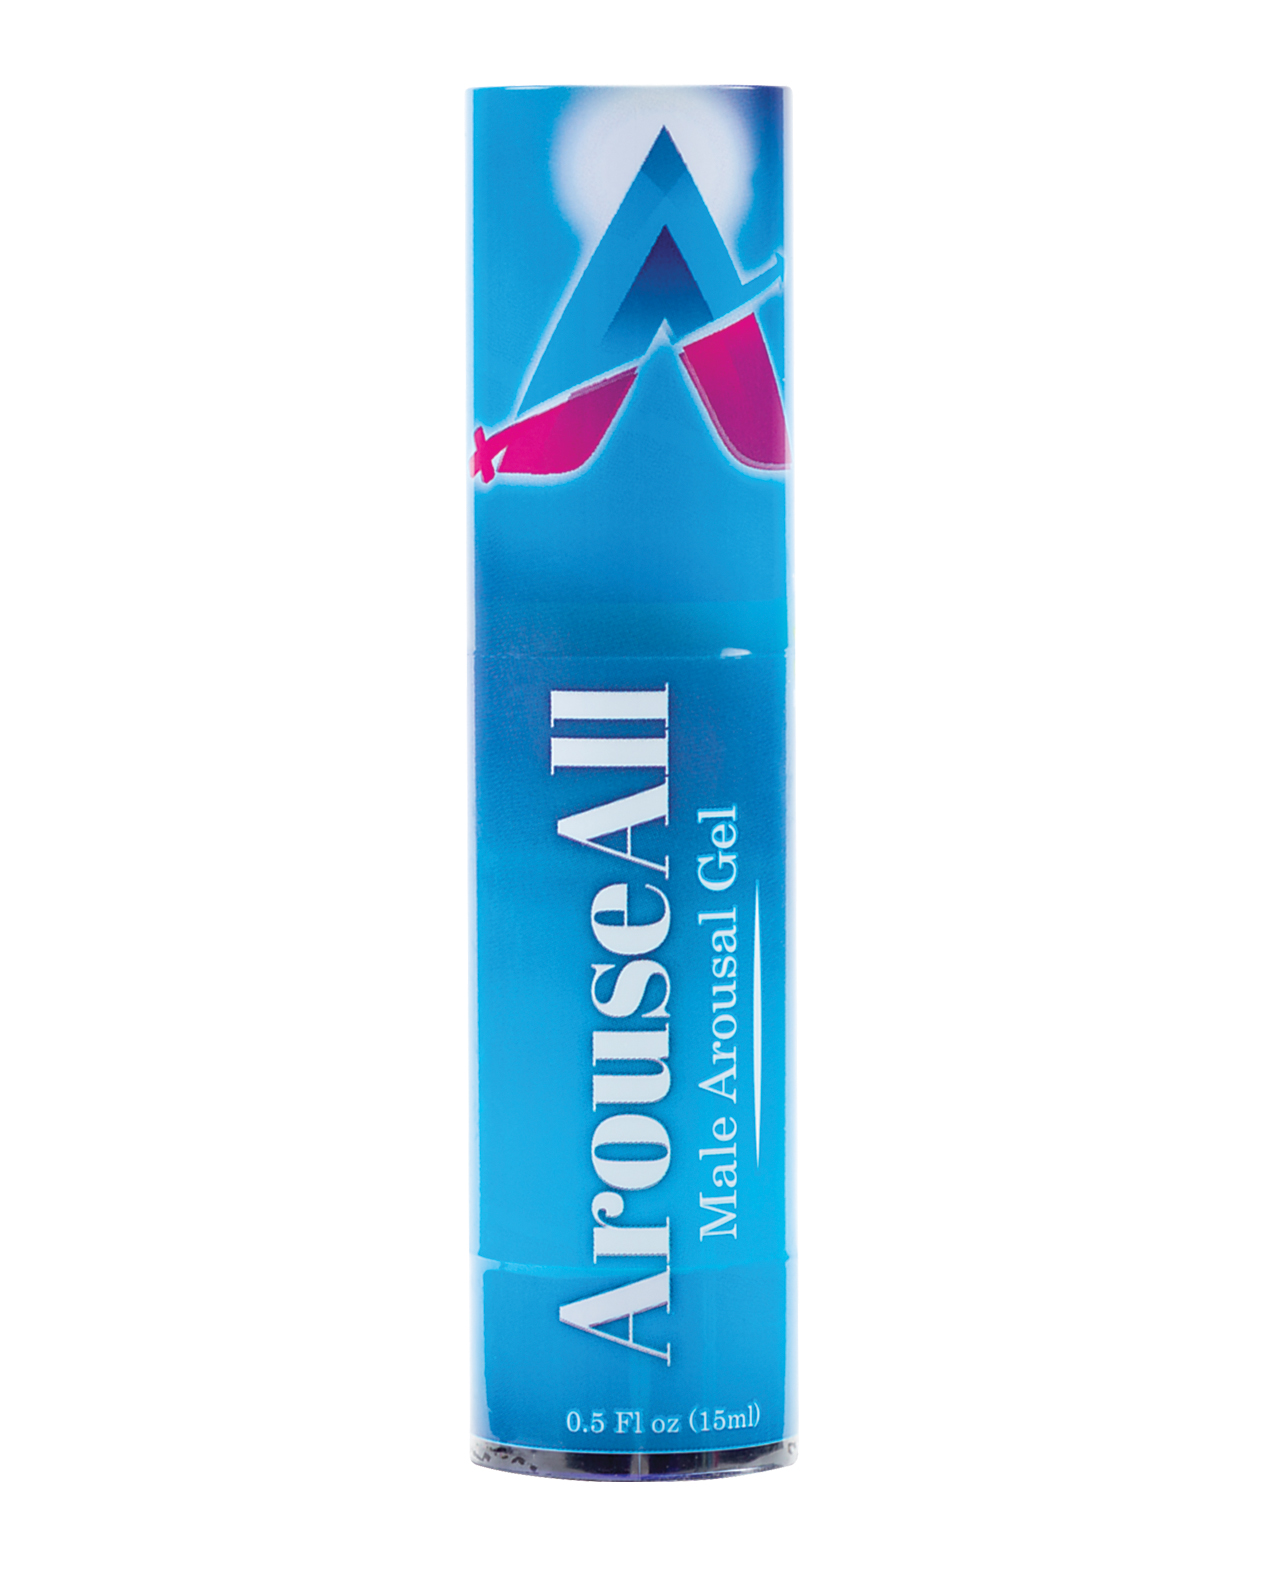 ArouseAll male Stimulating Gel in a blue package